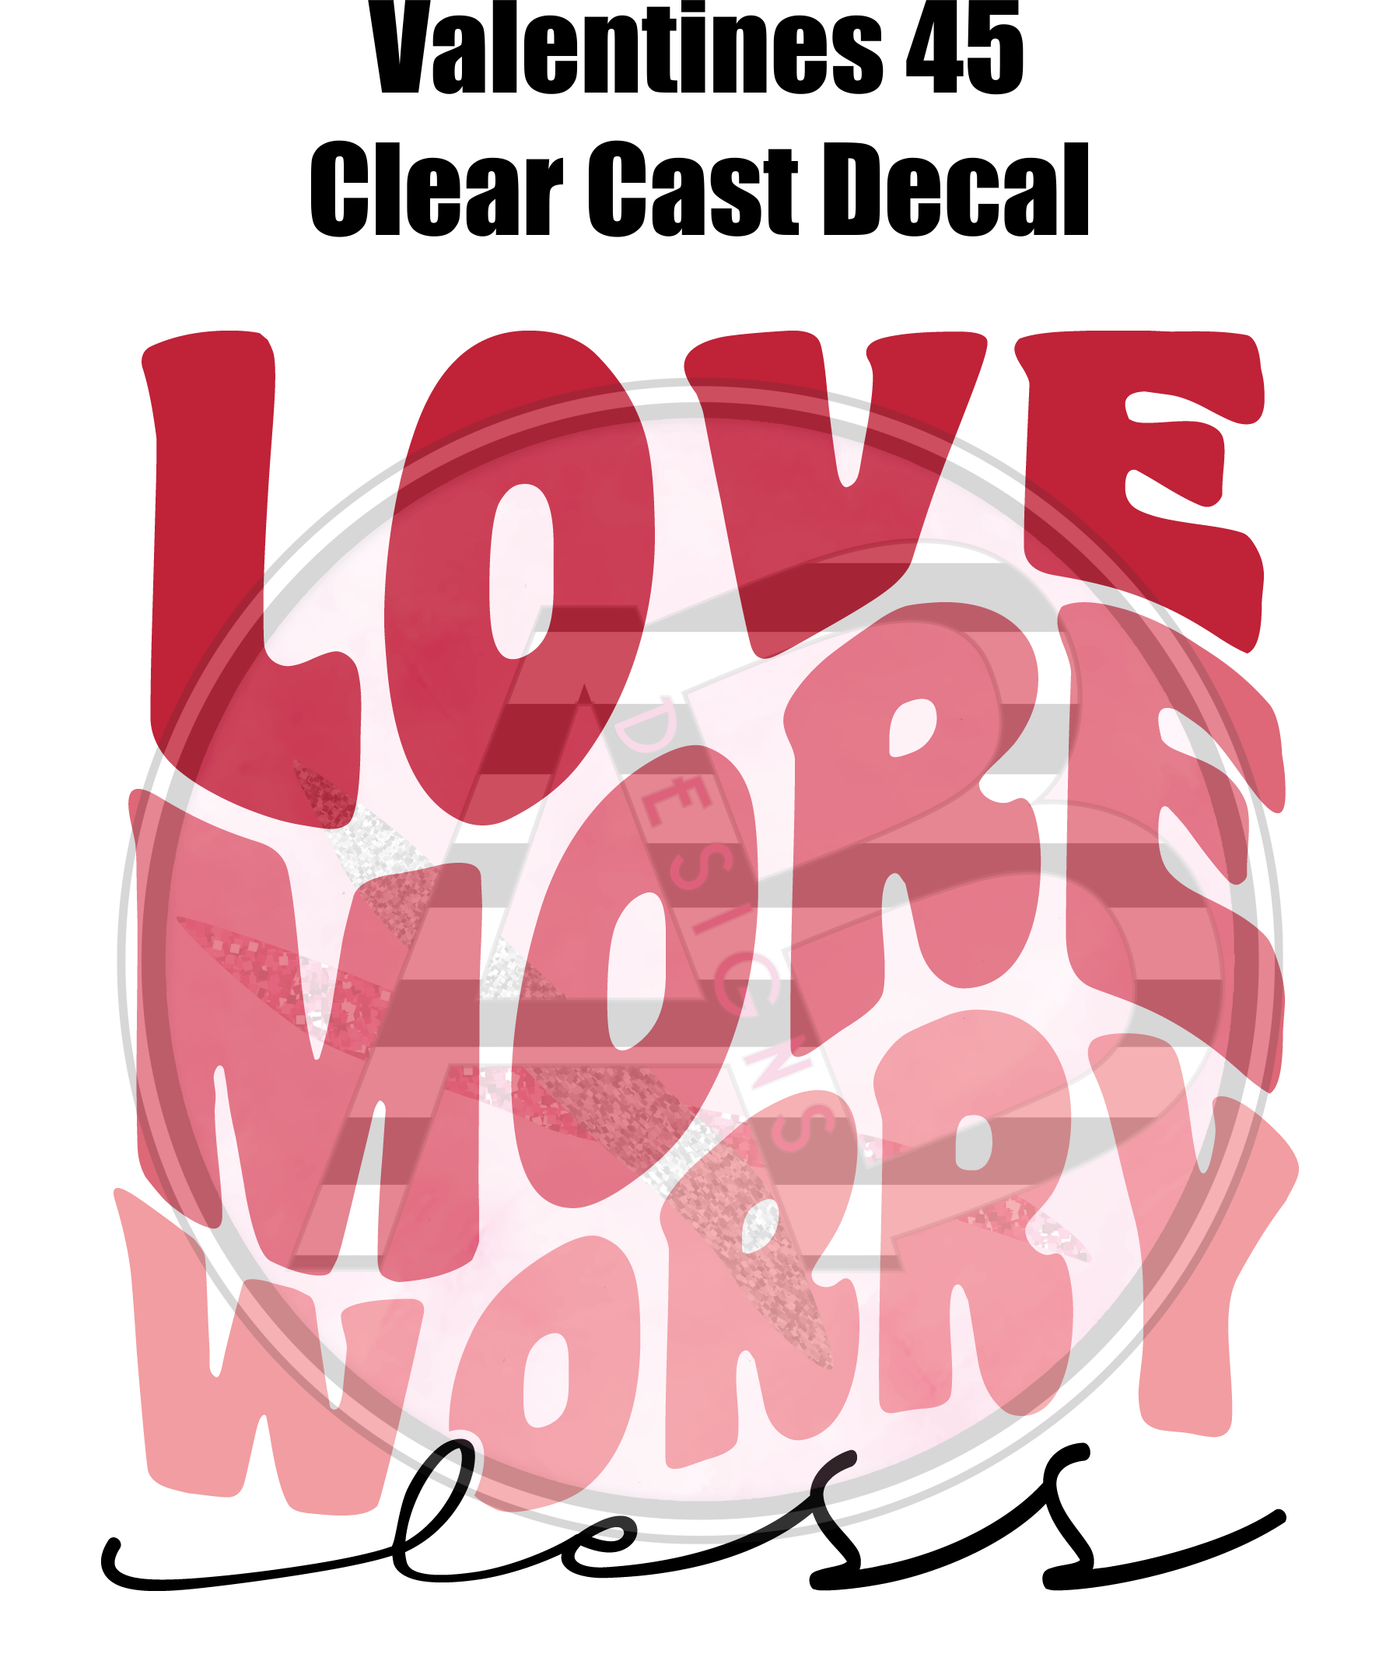 Valentines 45 - Clear Cast Decal